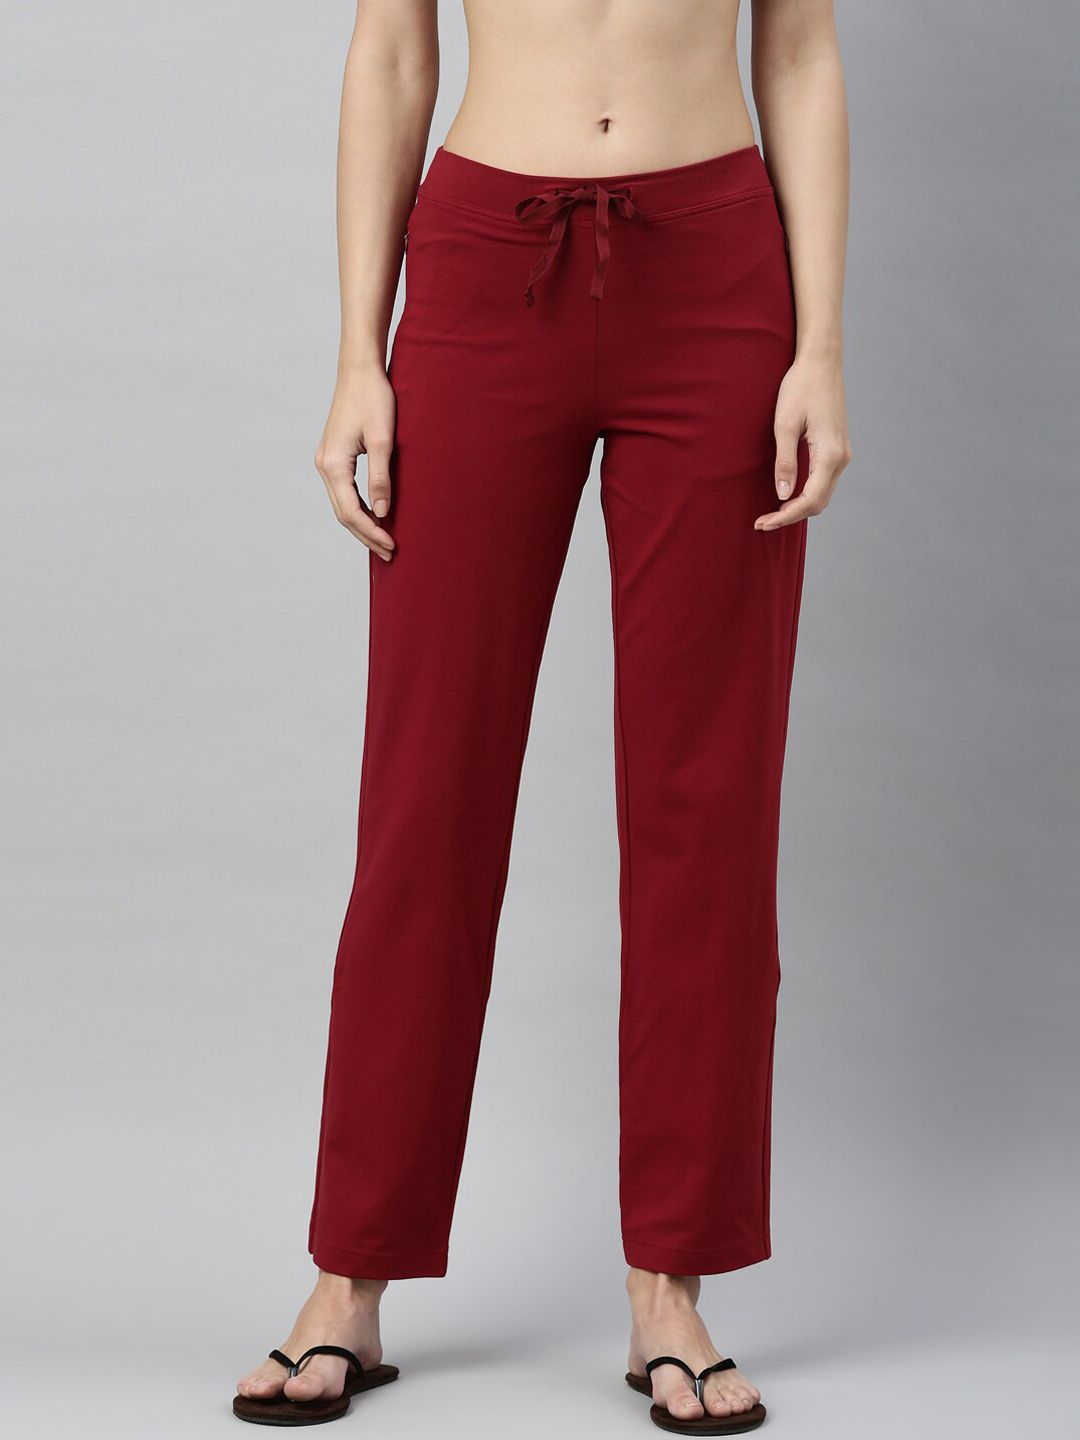 Enamor Women Maroon Solid Cotton Lounge Pants Price in India